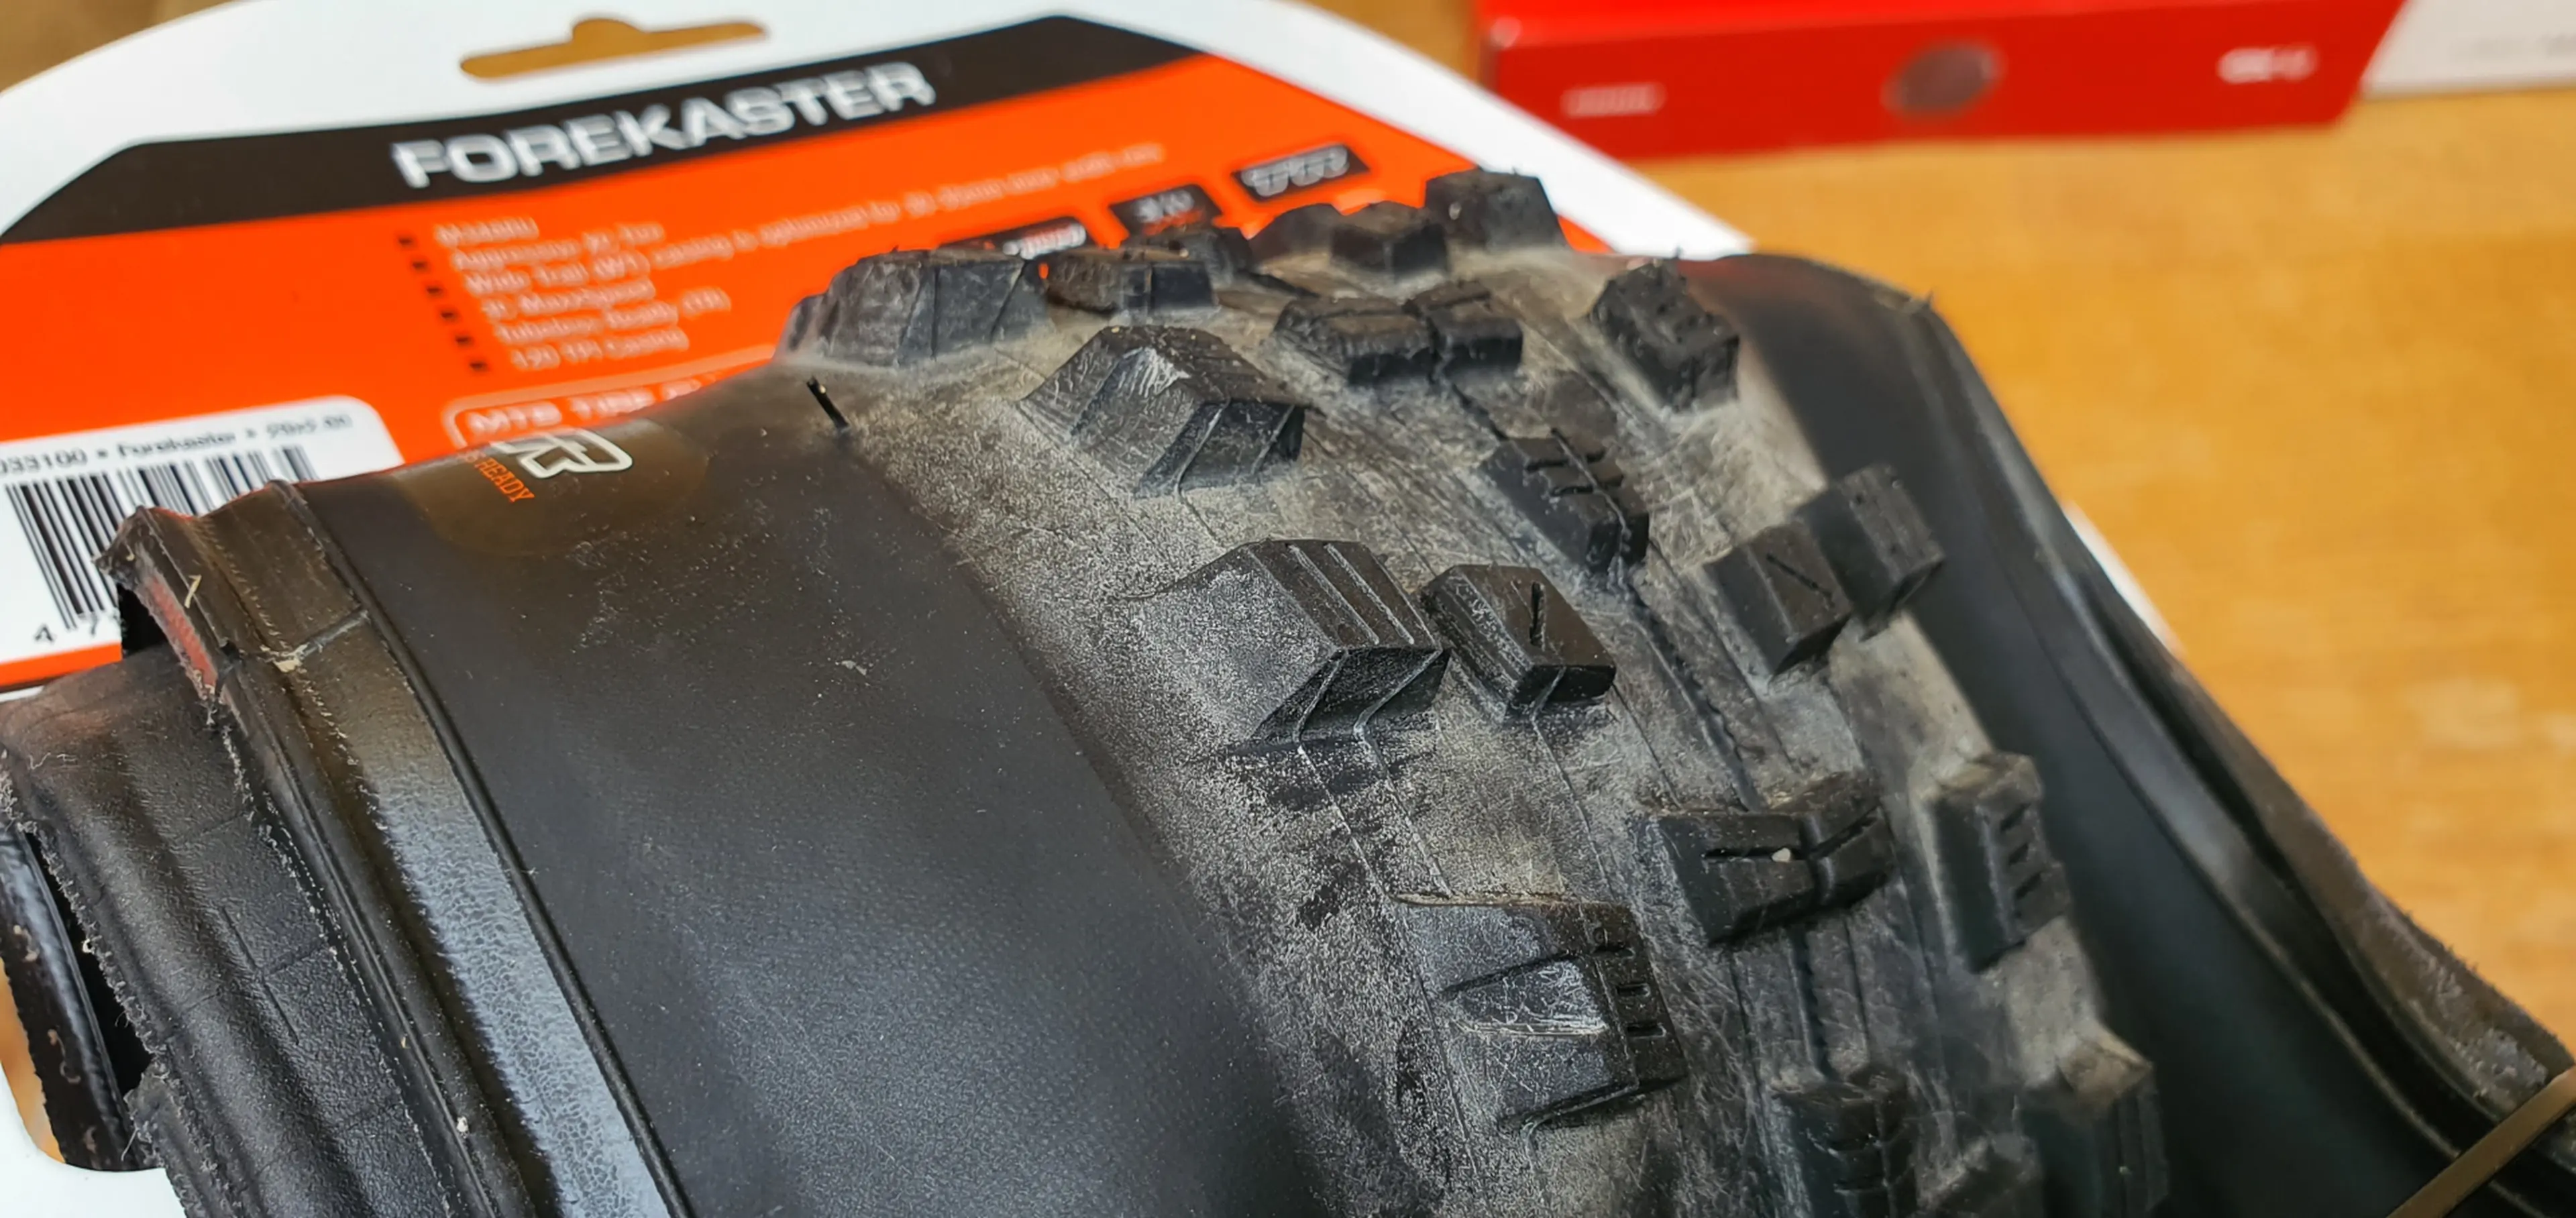 Image Anvelopa Maxxis Forekaster 29 x 2.6 TR/EXO/120Tpi